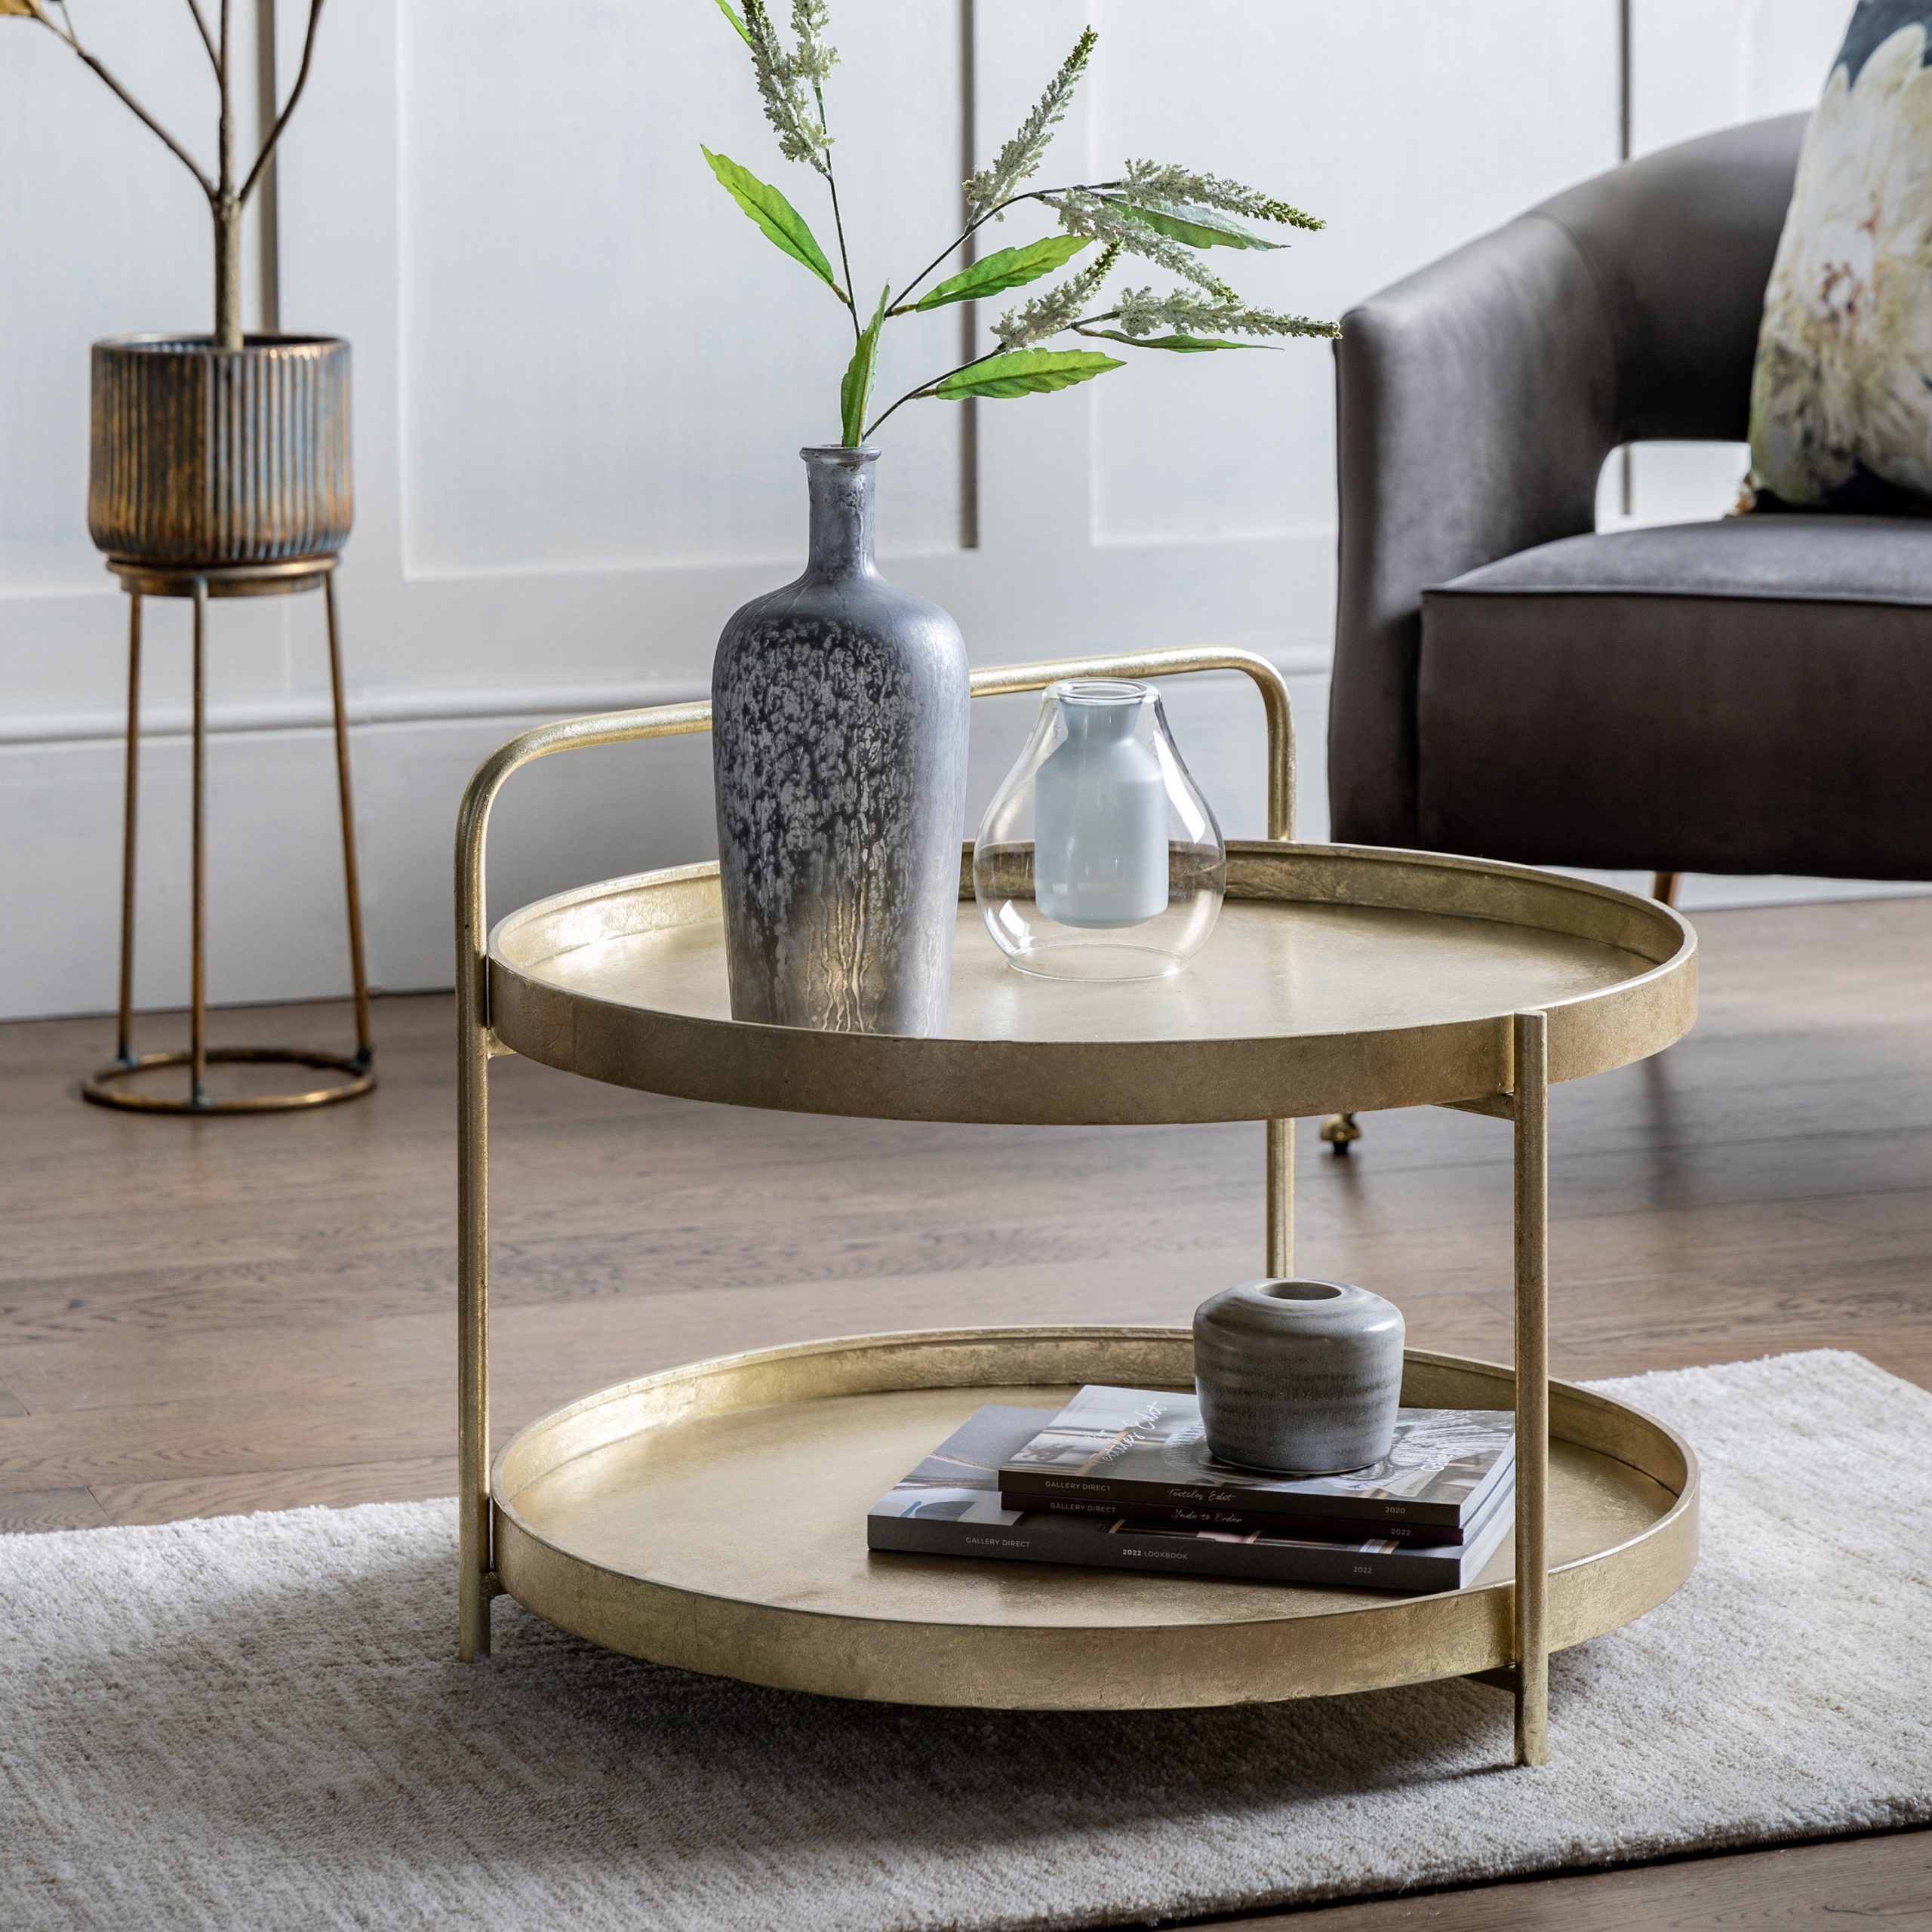 Gallery Direct 3 Legs Coffee Table With Storage & Reviews | Wayfair.co (View 13 of 15)